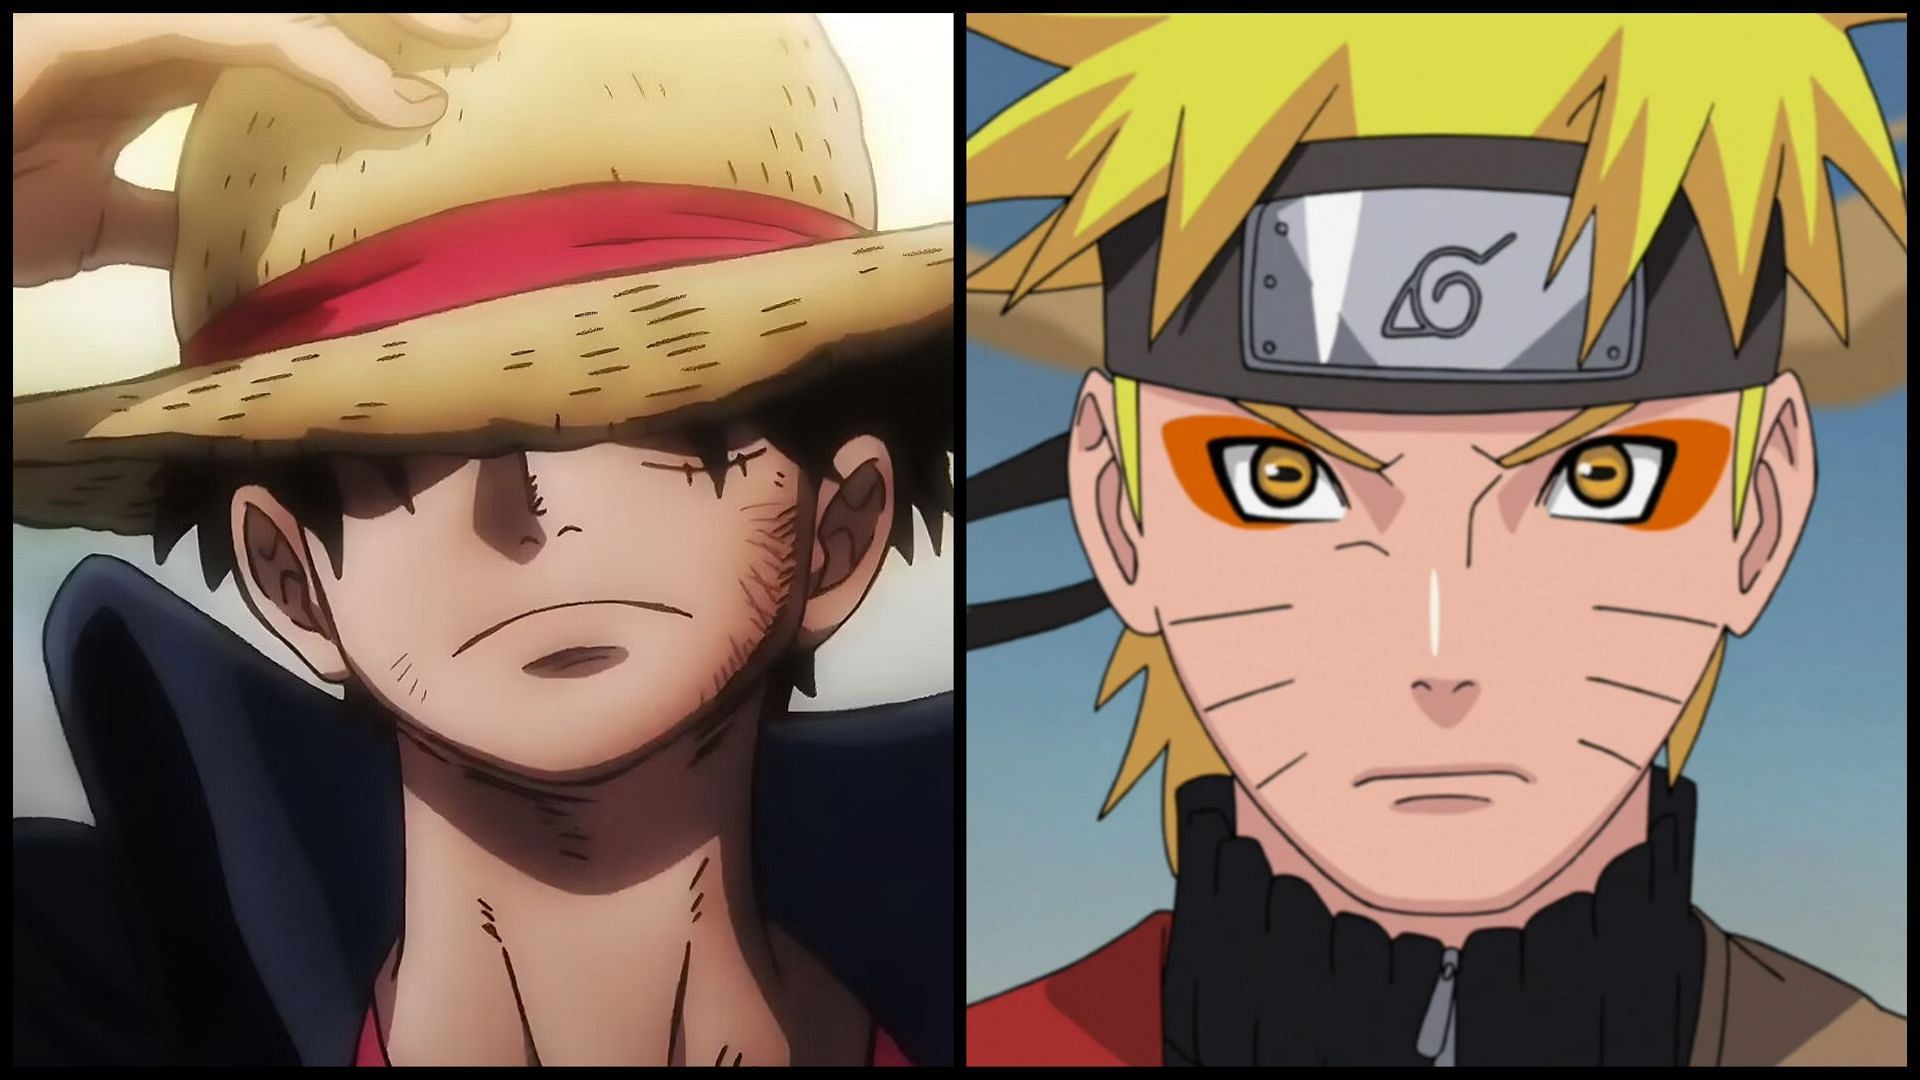 One Piece Vs Naruto: Which Anime Is Better?